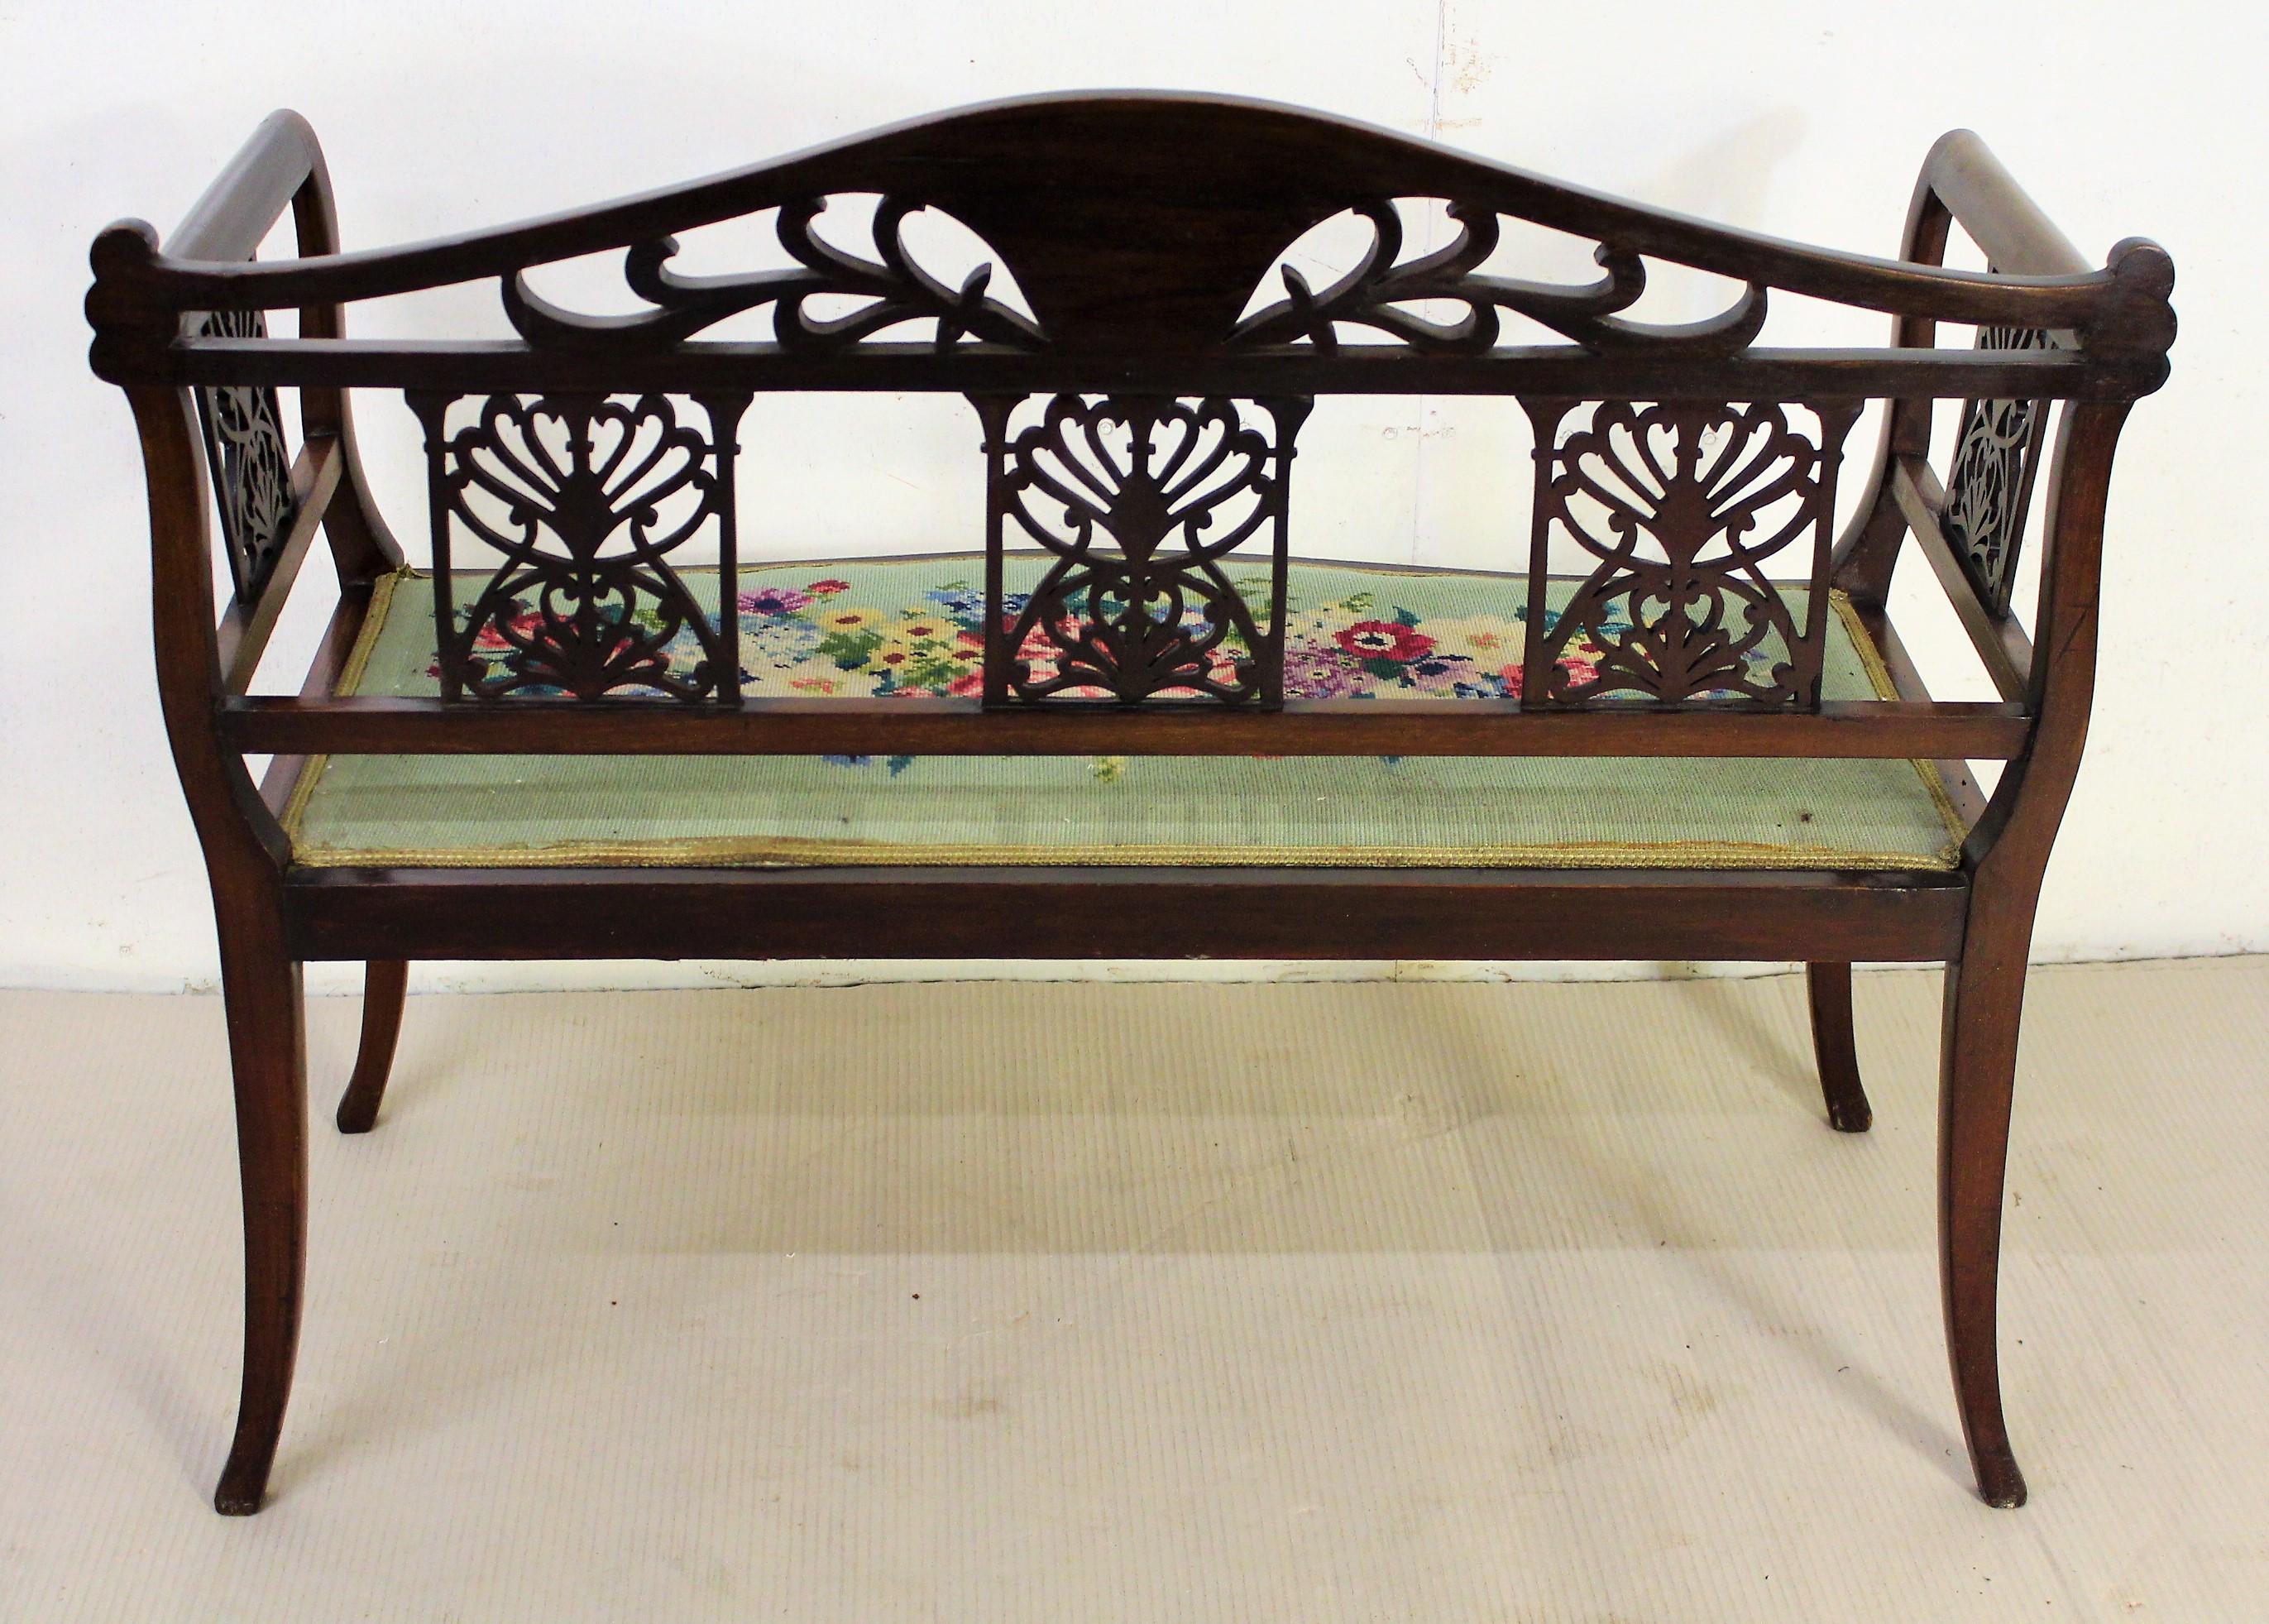 English Edwardian Period Inlaid Mahogany Settee or Bench For Sale 6